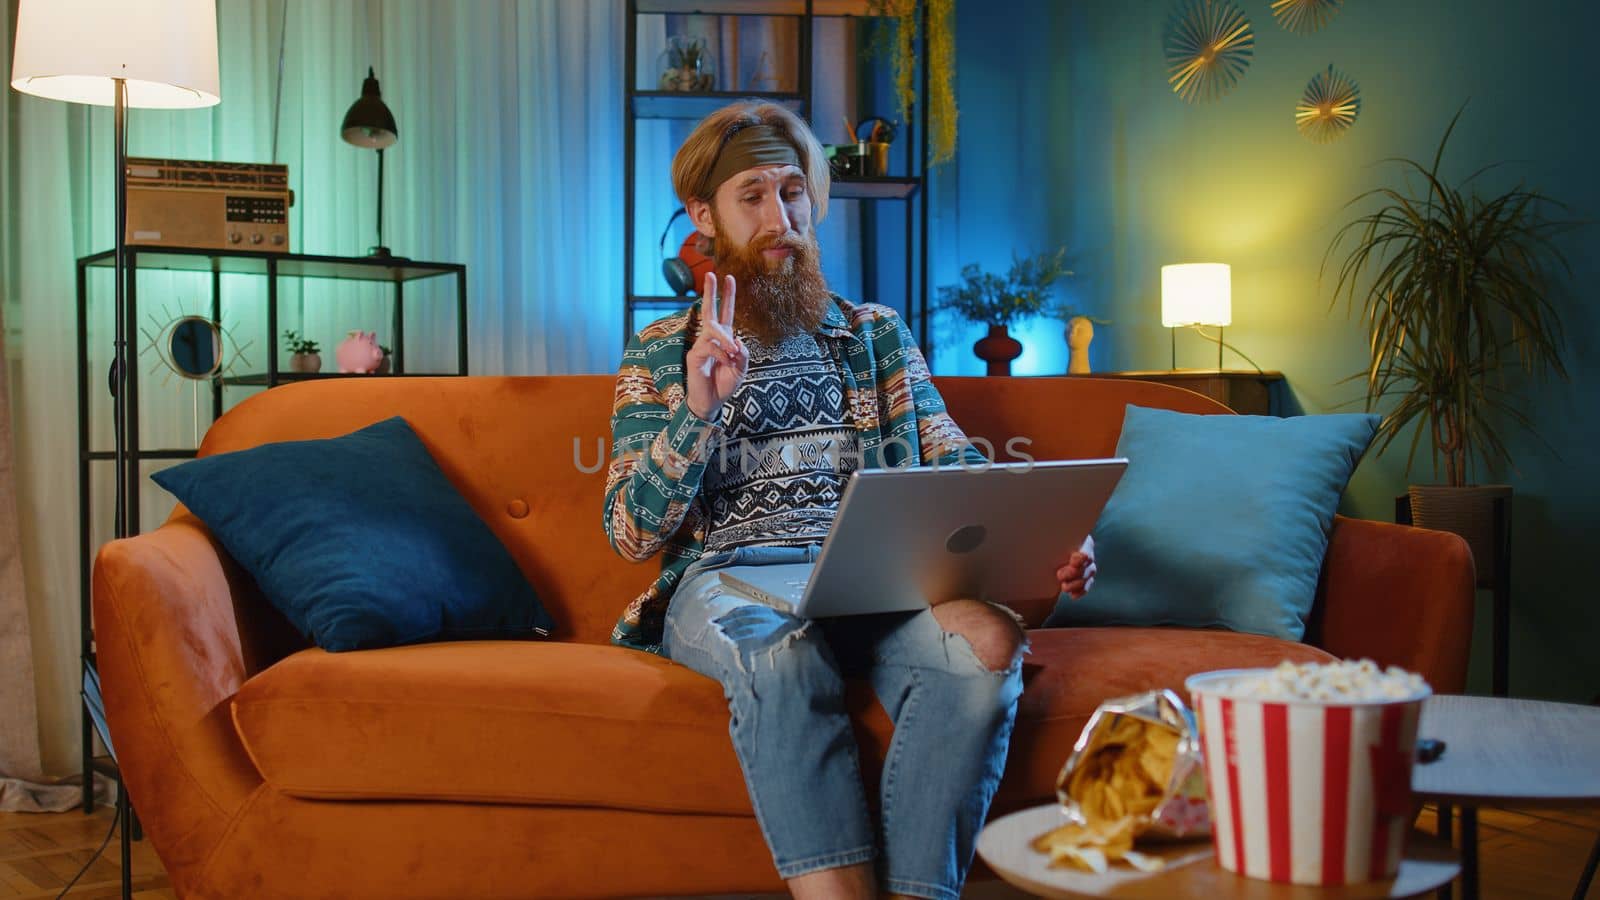 Man sitting on home couch, looking at camera, making video conference call with friends or family by efuror